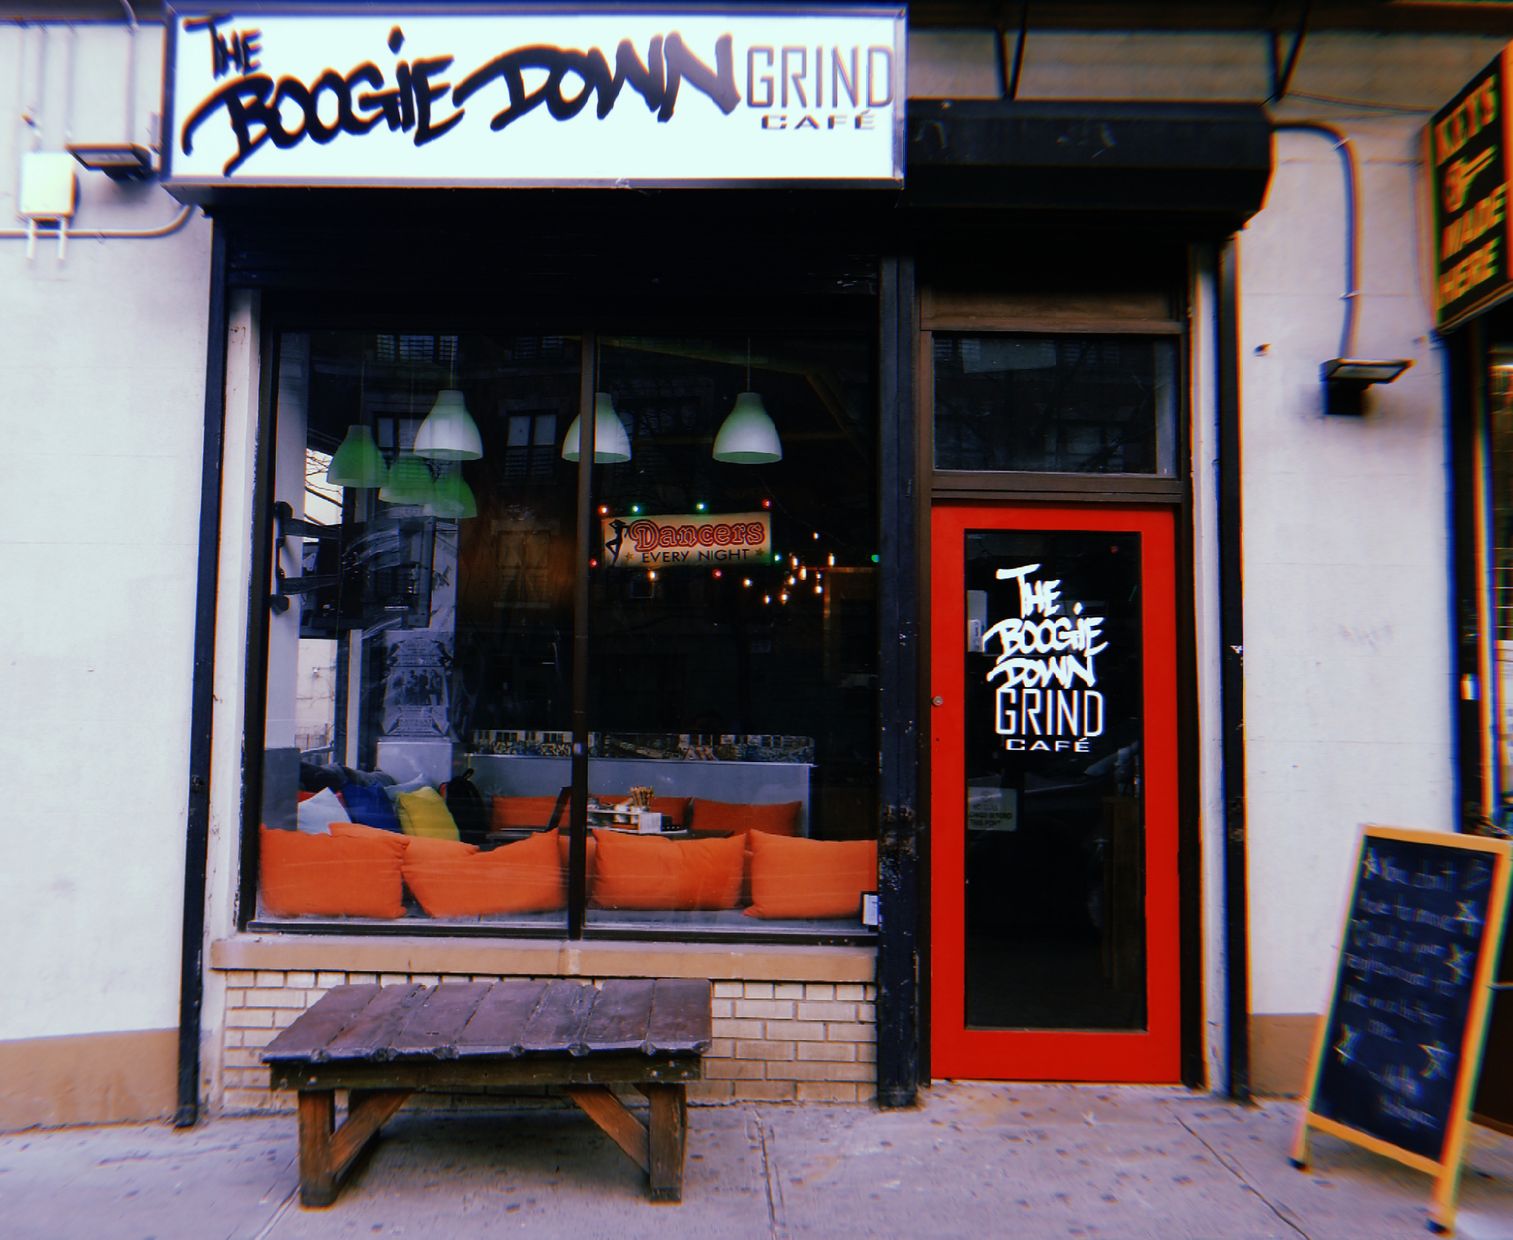 This Hip Hop Coffee Shop Received A Financial Boost From Beyoncé To Help Continue Its Commitment To Community